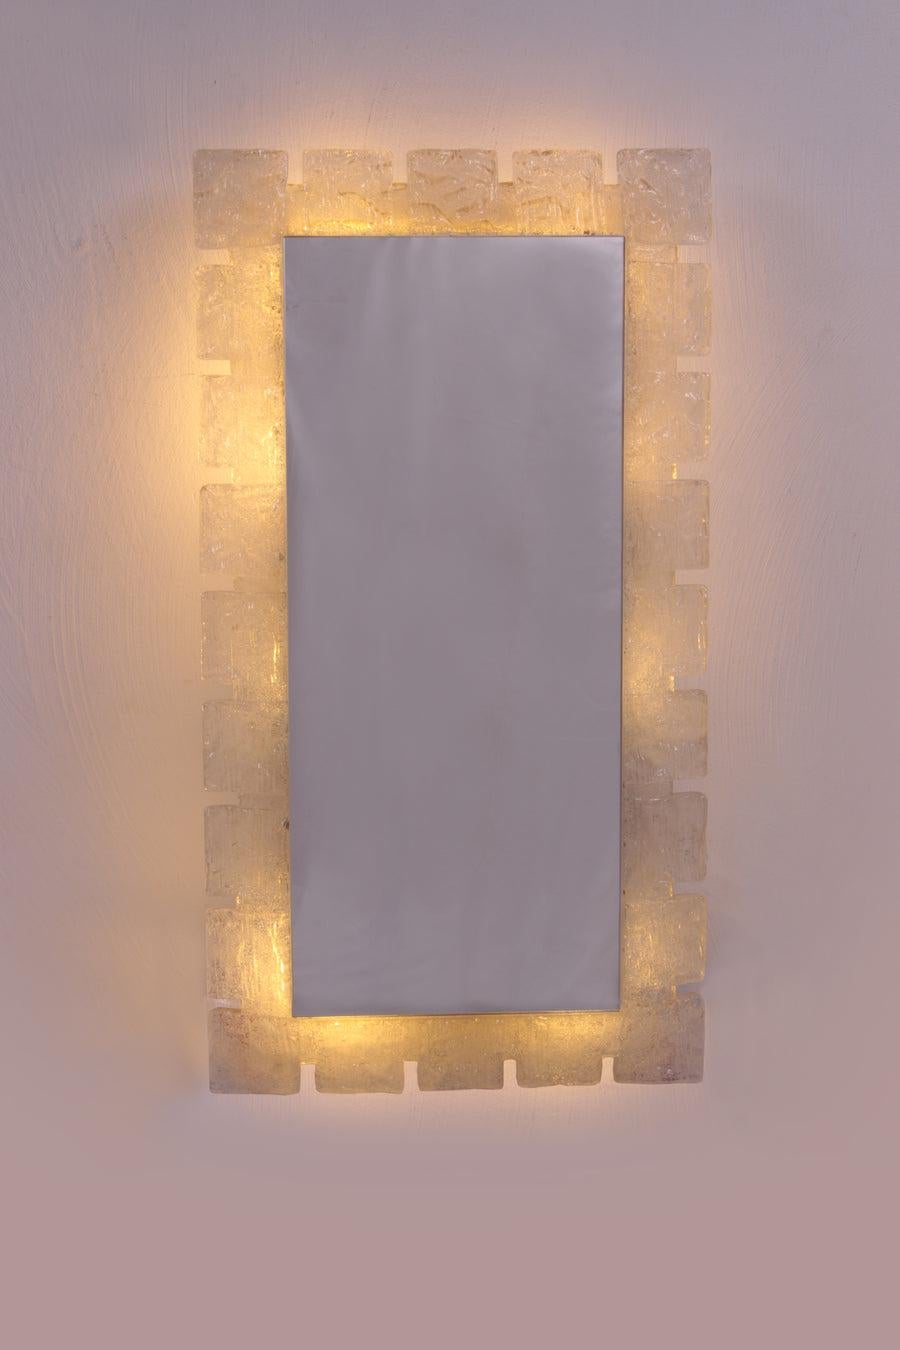 Oblong Plexiglass Hillebrand Illuminated Mirror Germany, 1960

Additional information: 
Dimensions: 47 W x 7 D x 88 H cm 
Period of Time: 1960
Country of origin: Germany
Condition: Good